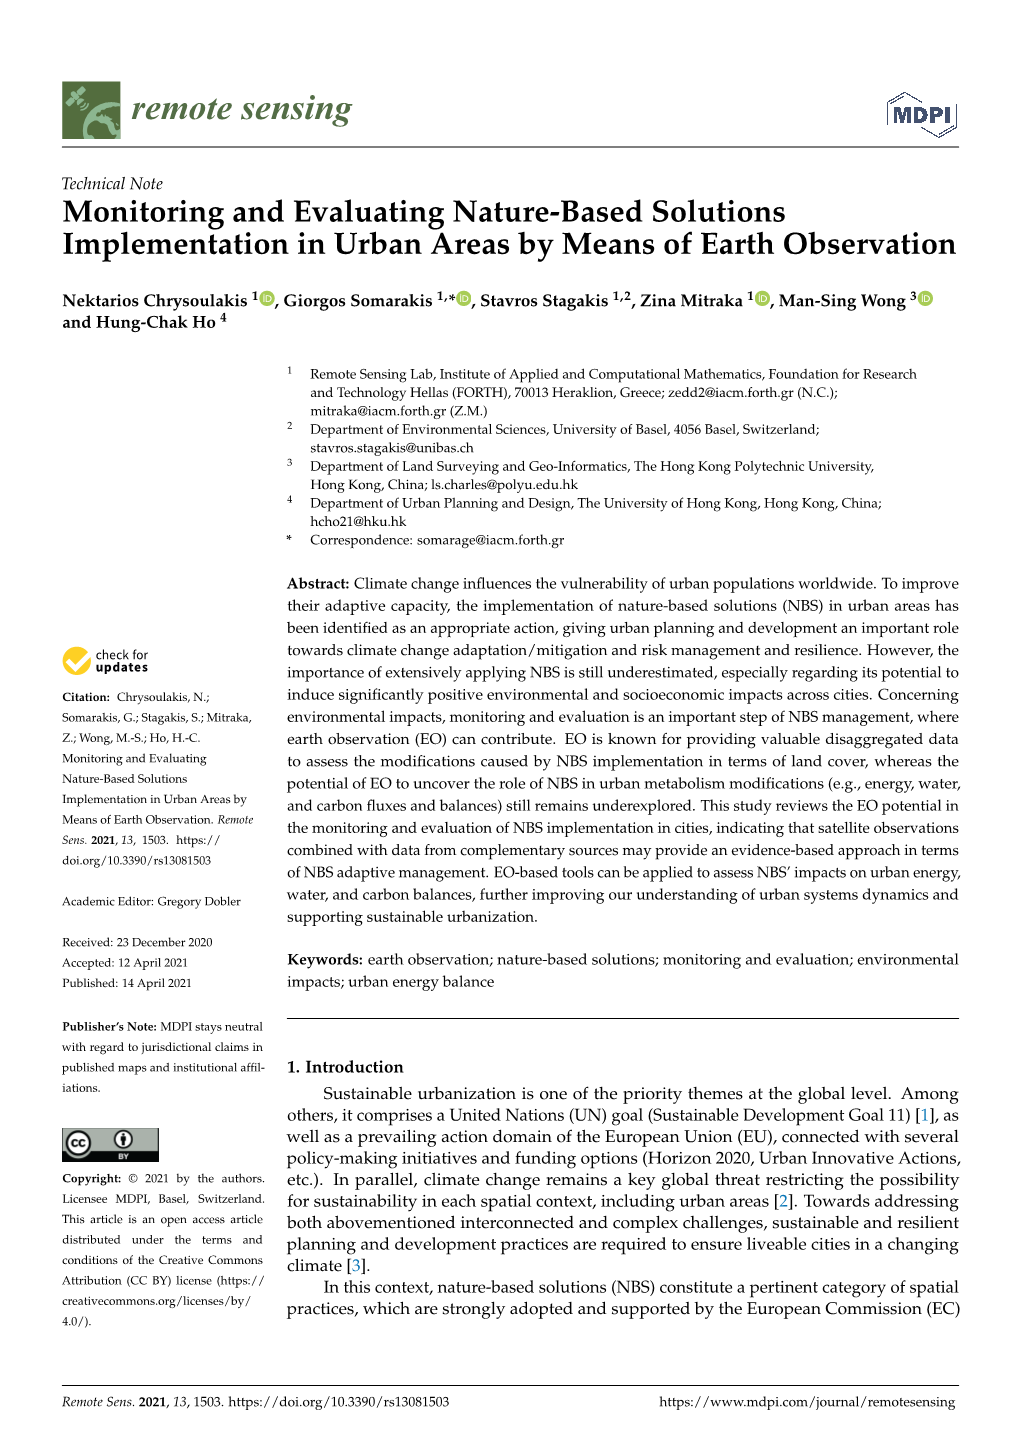 Monitoring and Evaluating Nature-Based Solutions Implementation in Urban Areas by Means of Earth Observation